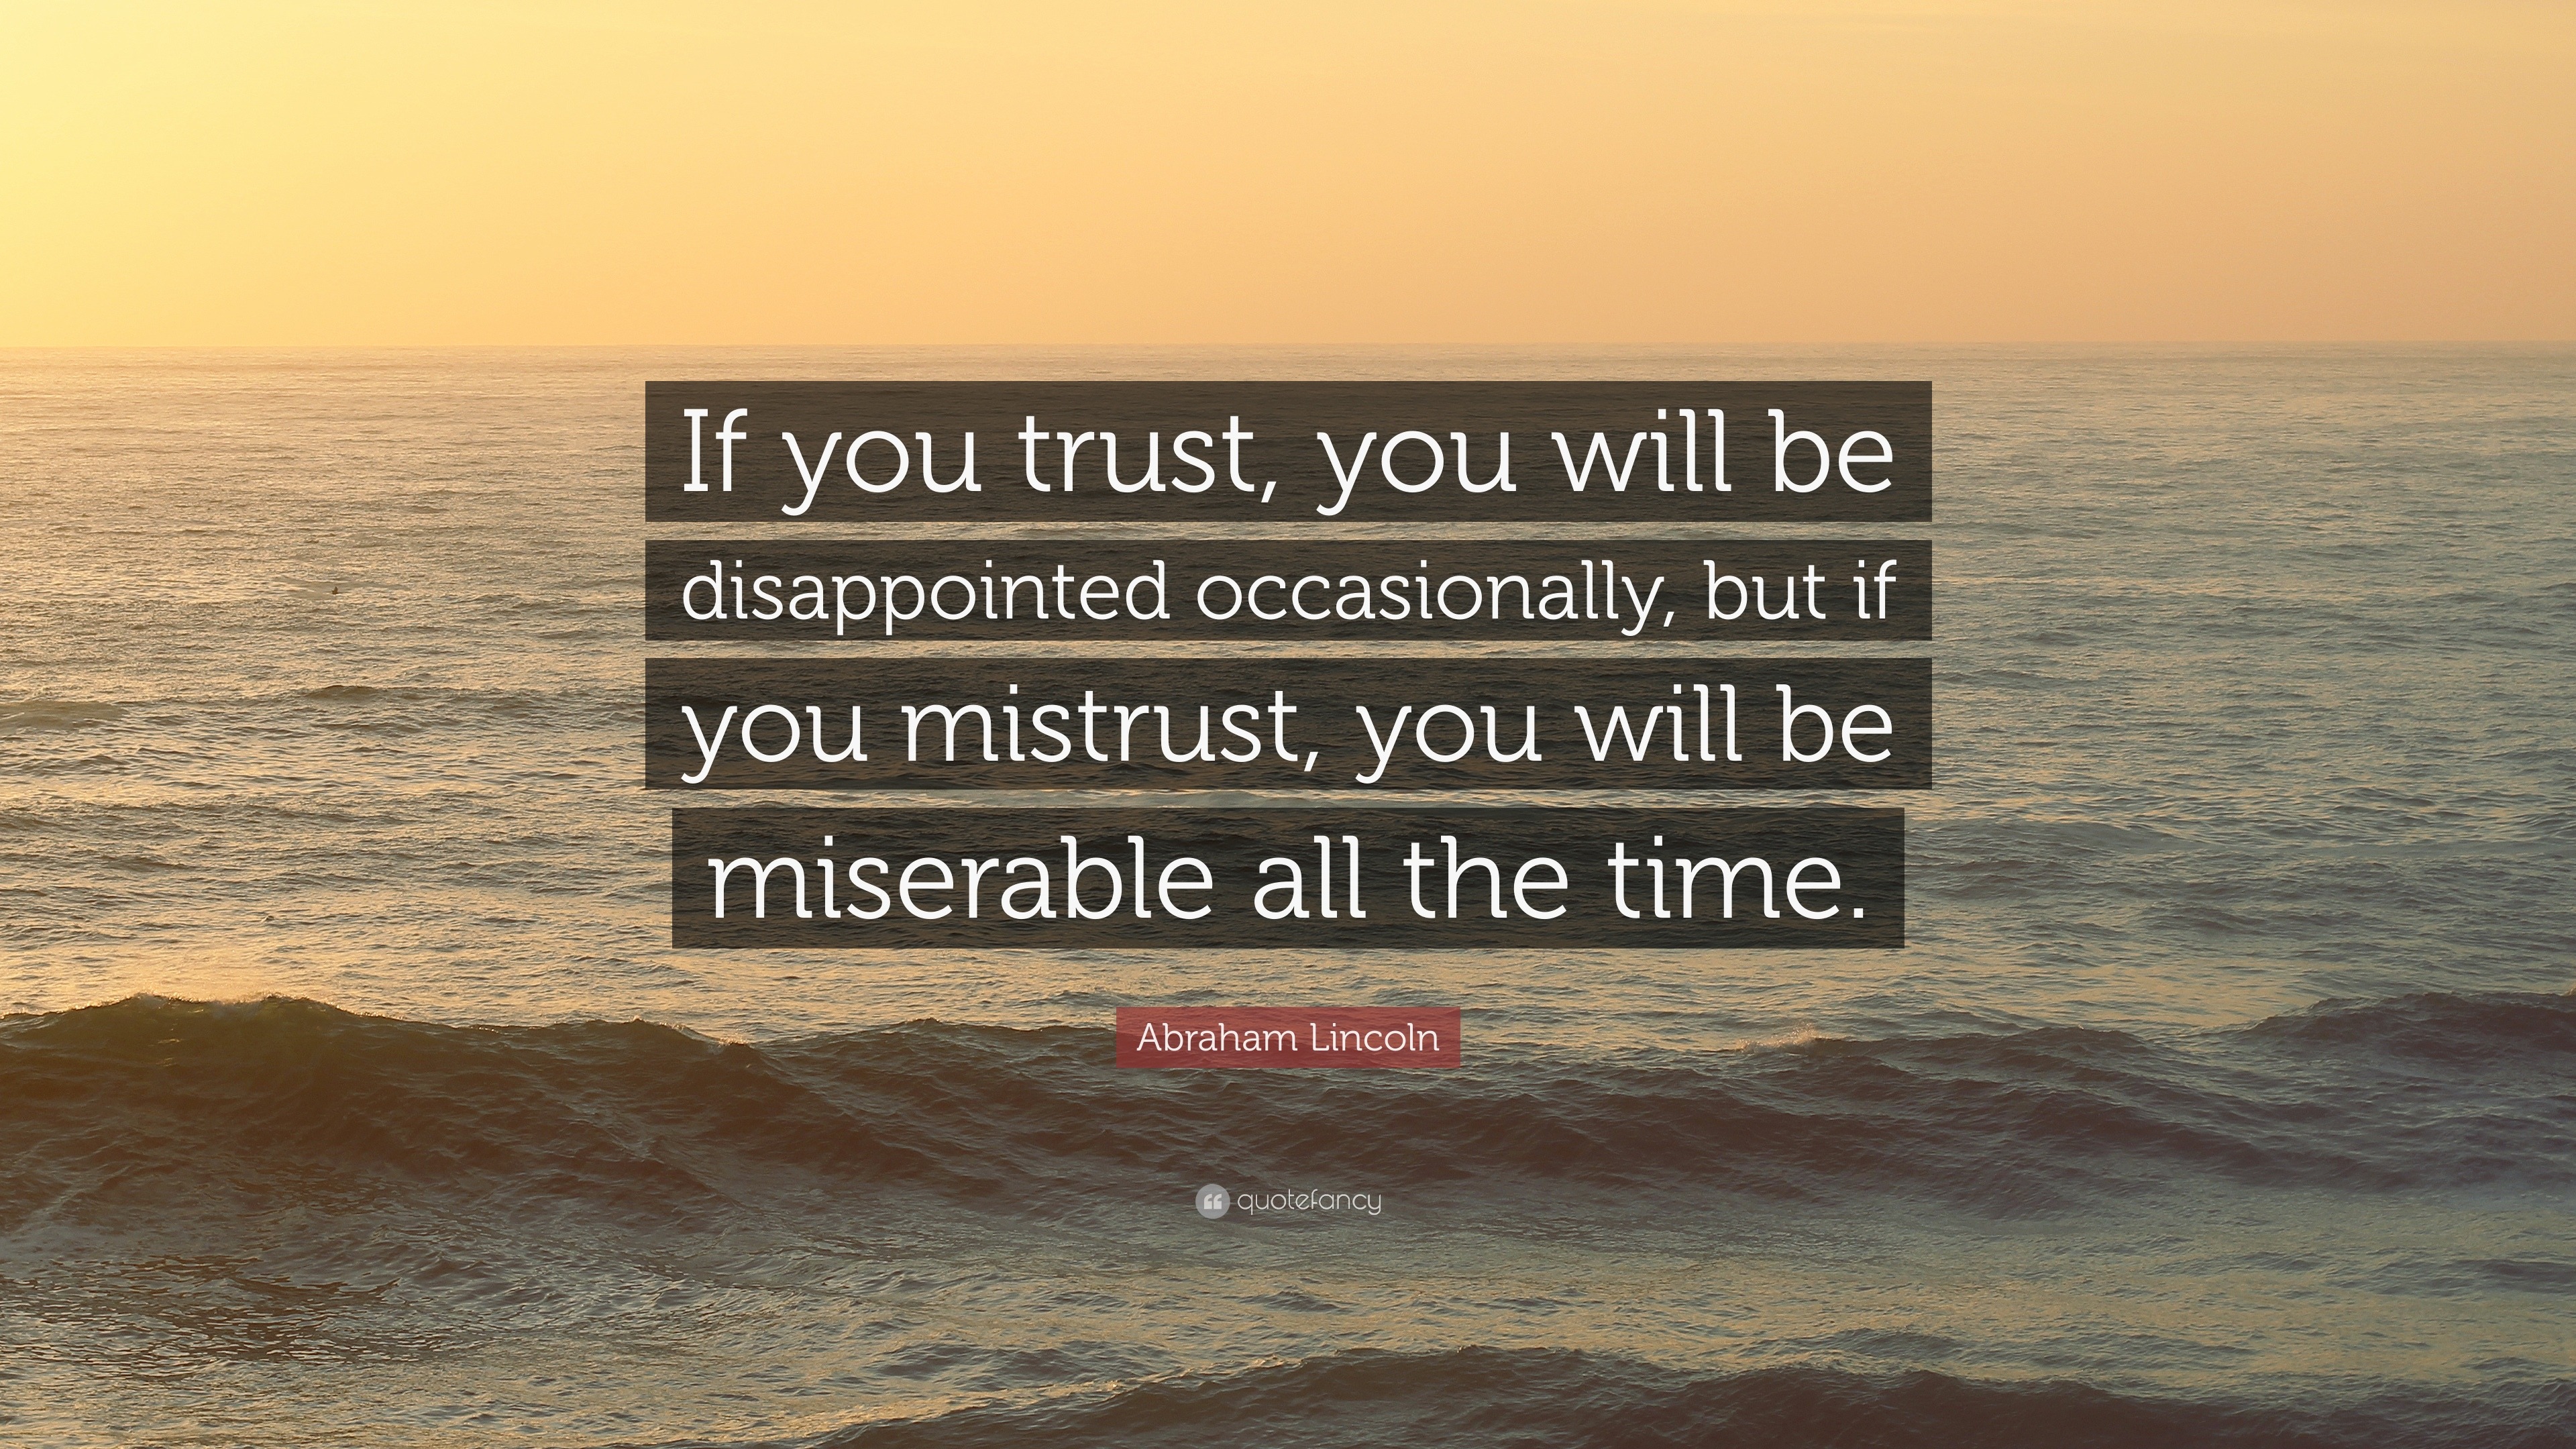 Abraham Lincoln Quote If You Trust You Will Be Disappointed Occasionally But If You Mistrust You Will Be Miserable All The Time 12 Wallpapers Quotefancy